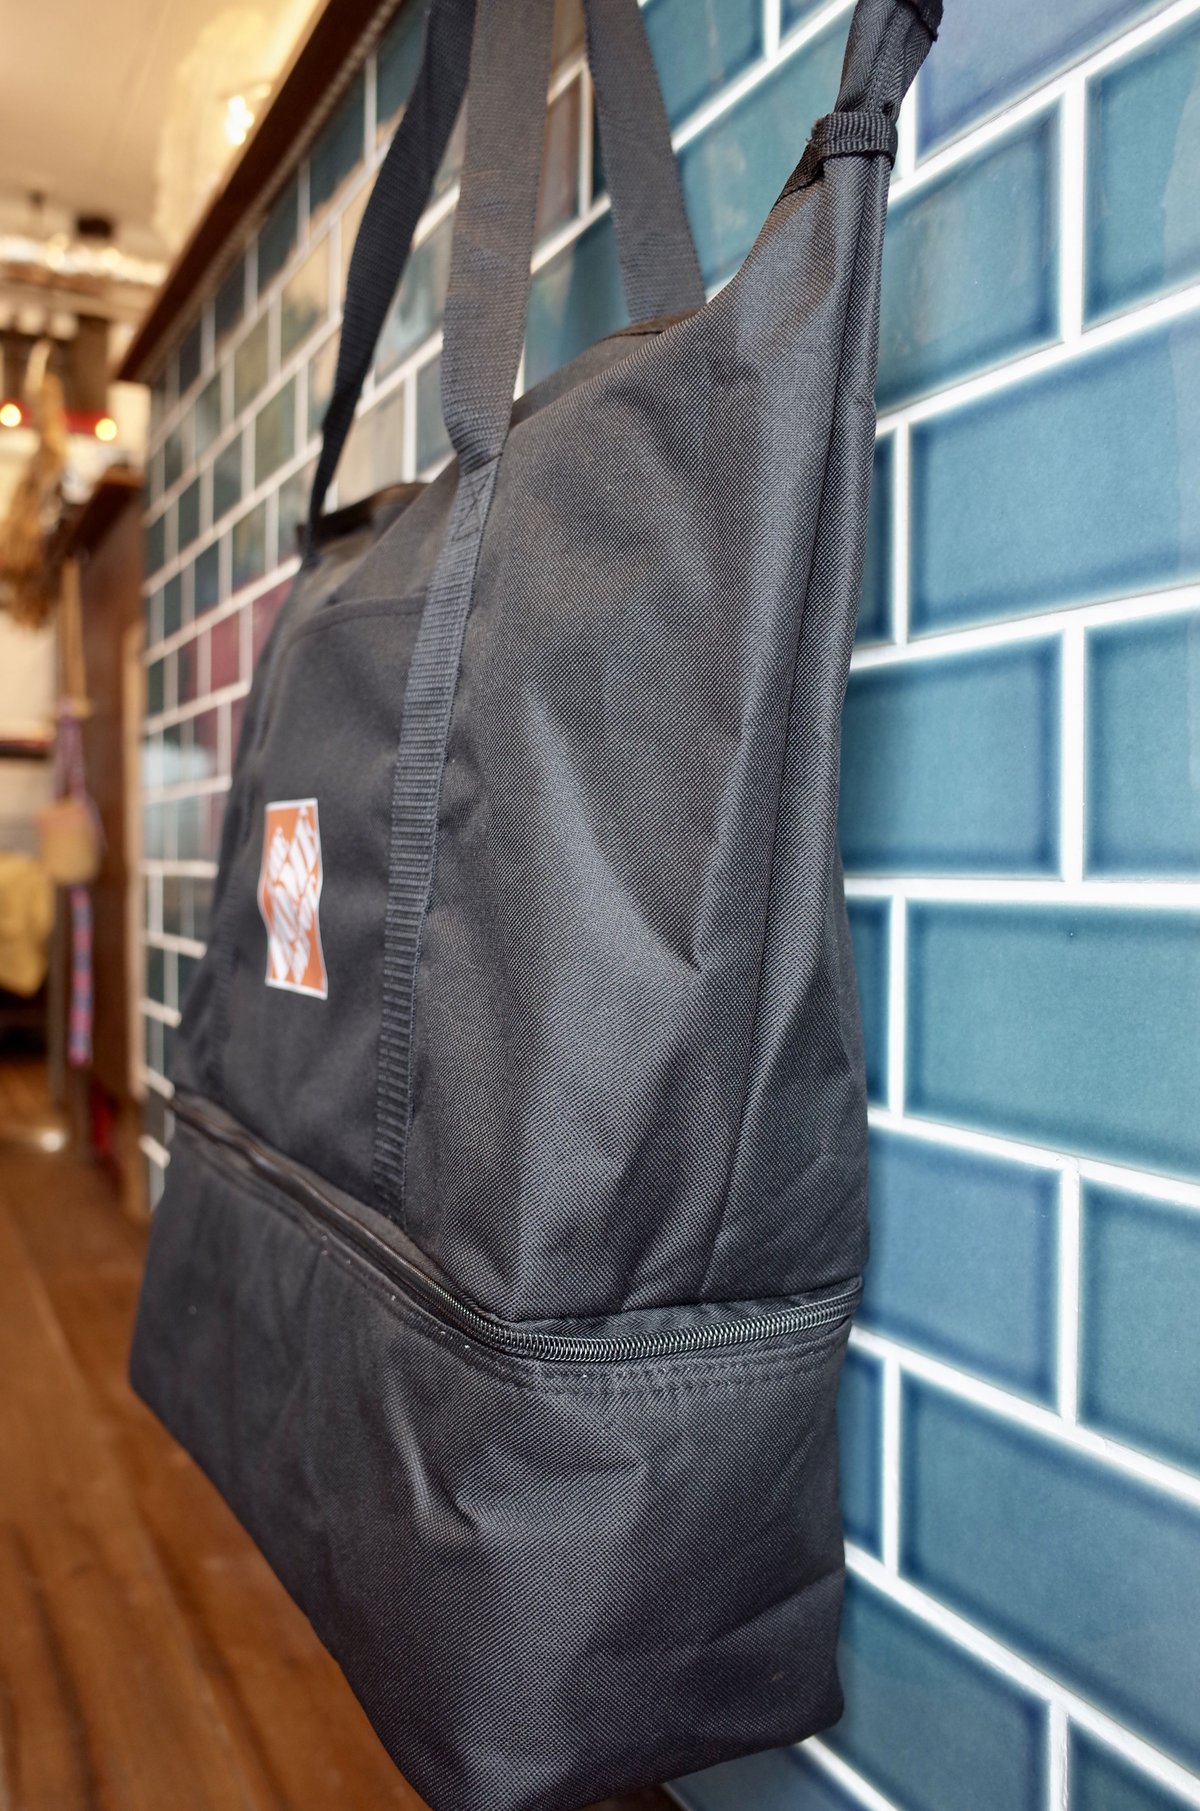 THE HOME DEPOT Cooler Tote Bag ホームデポ 保冷トートバッグ